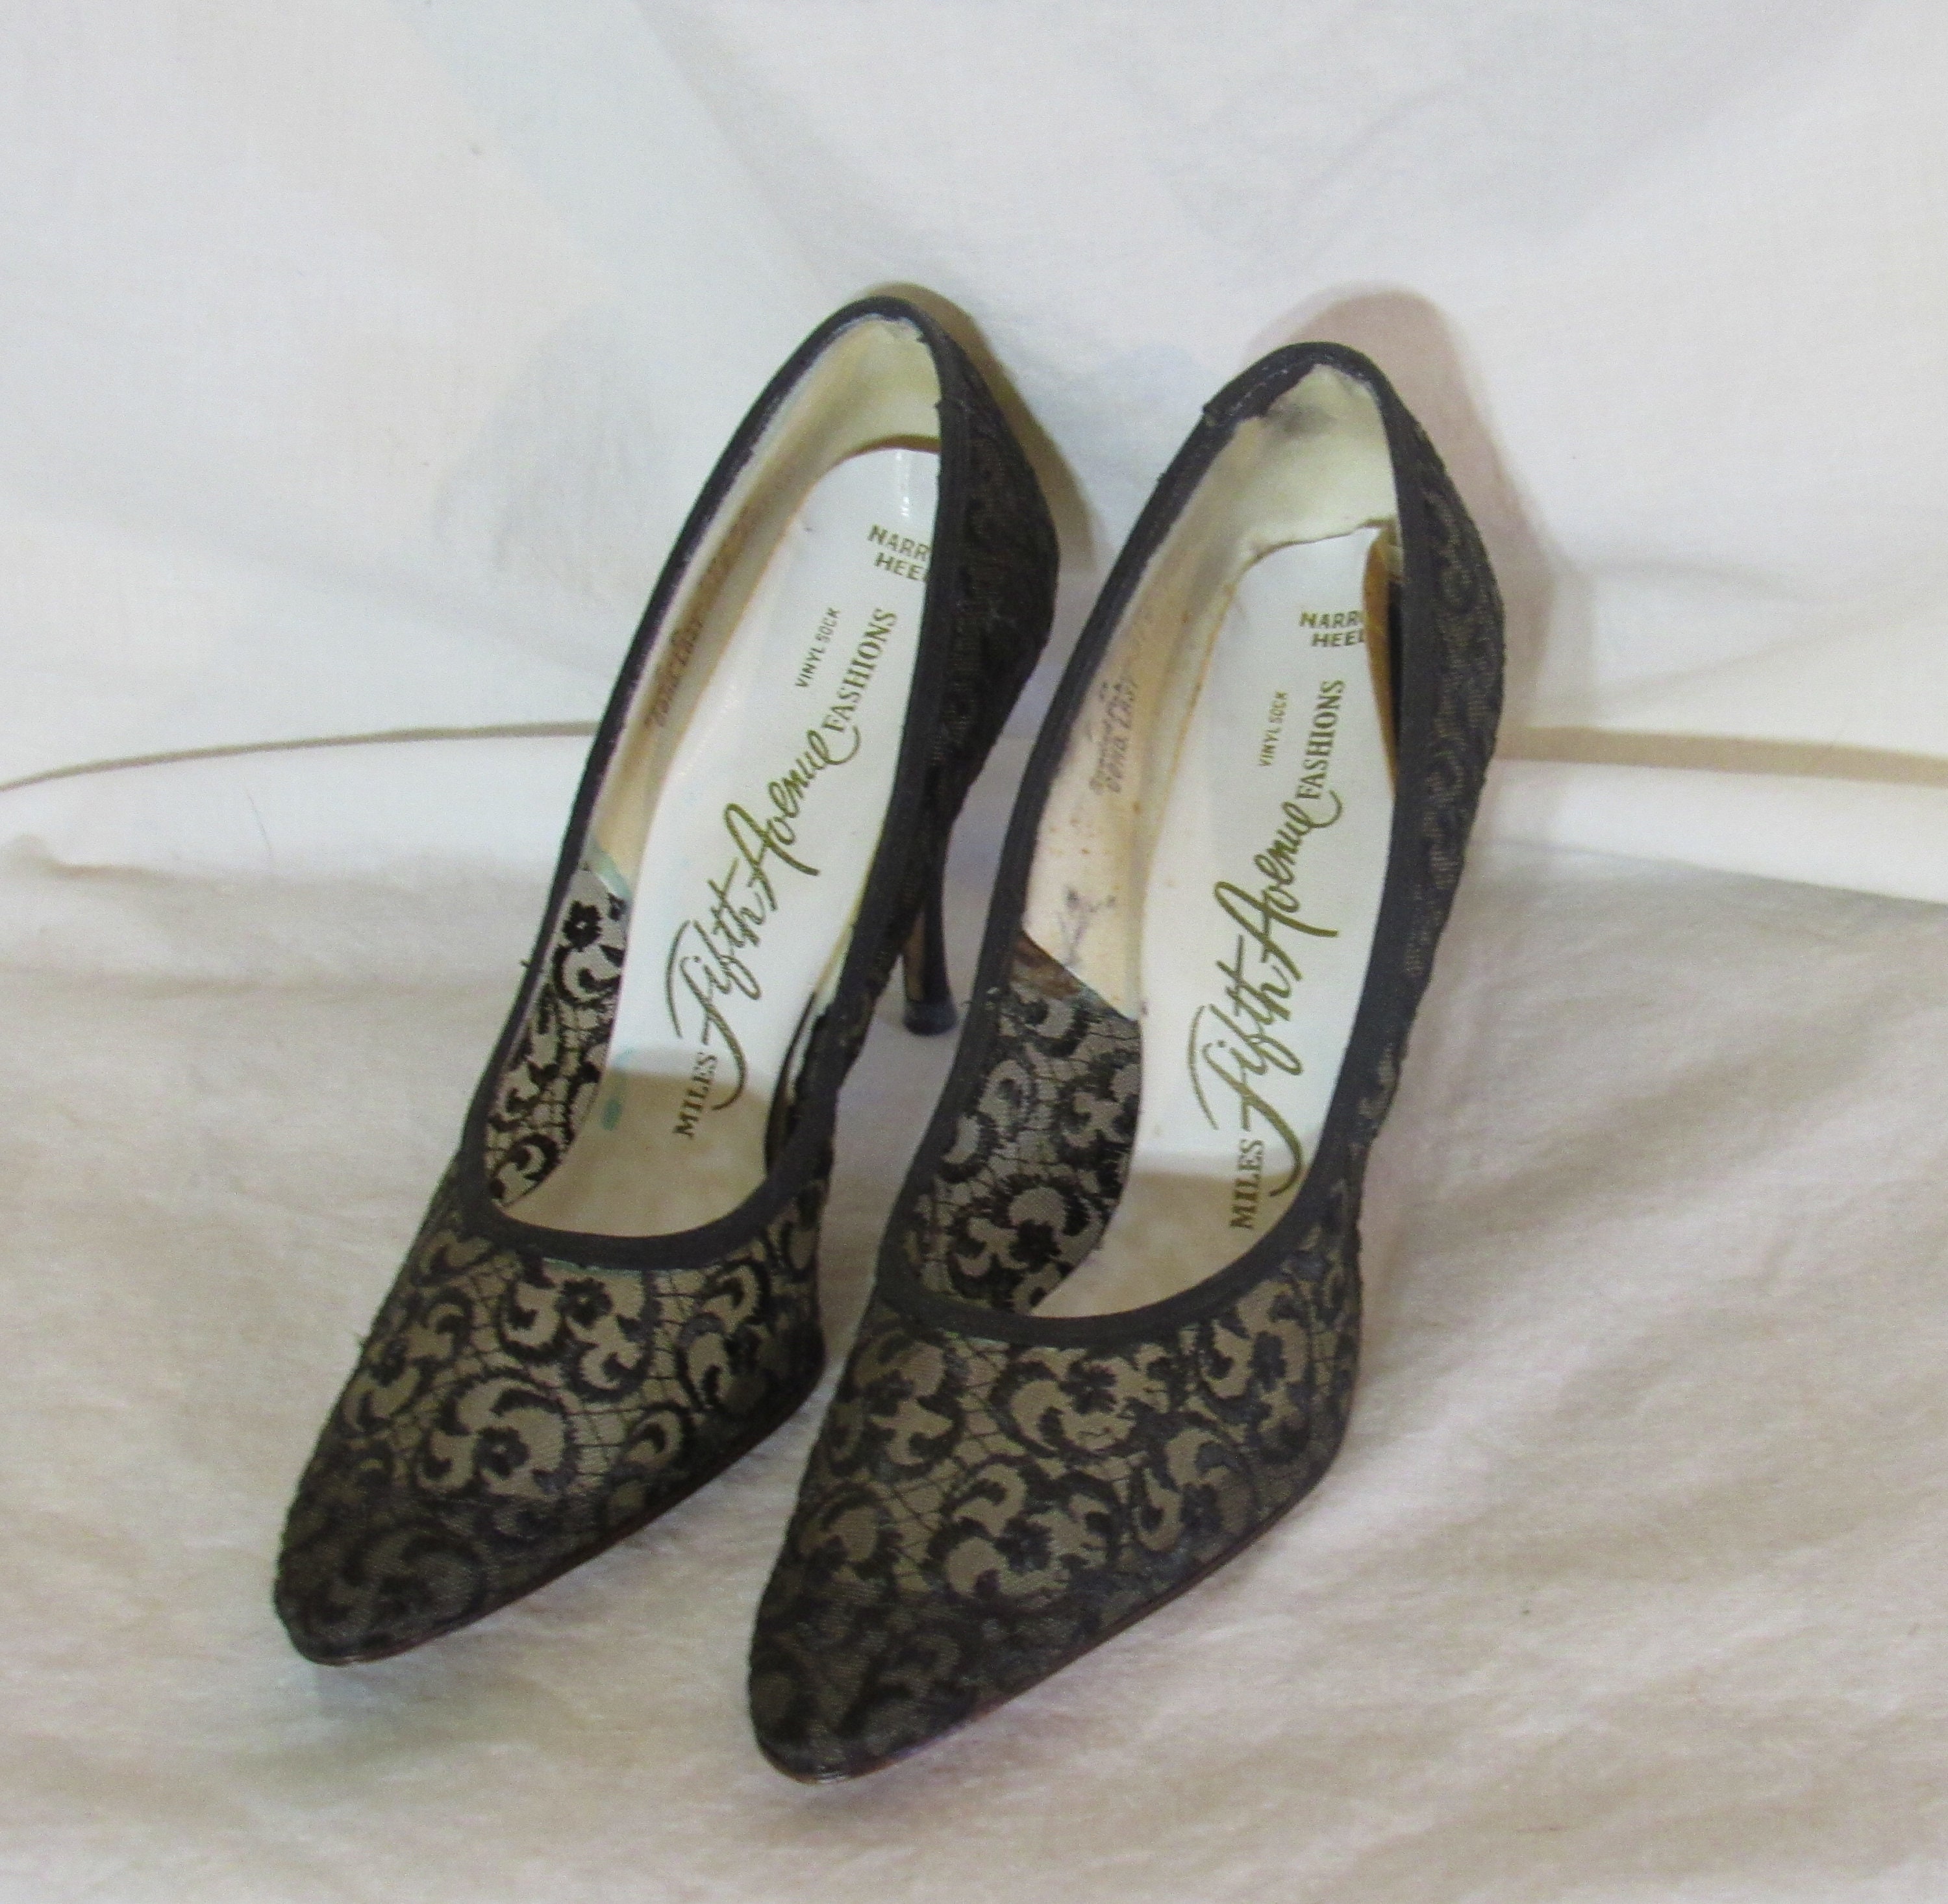 Vintage CHANEL Beige and Black Leather Shoes Classic Pumps. EU 36 US5.5.  Small Size. 050320r20 -  Finland